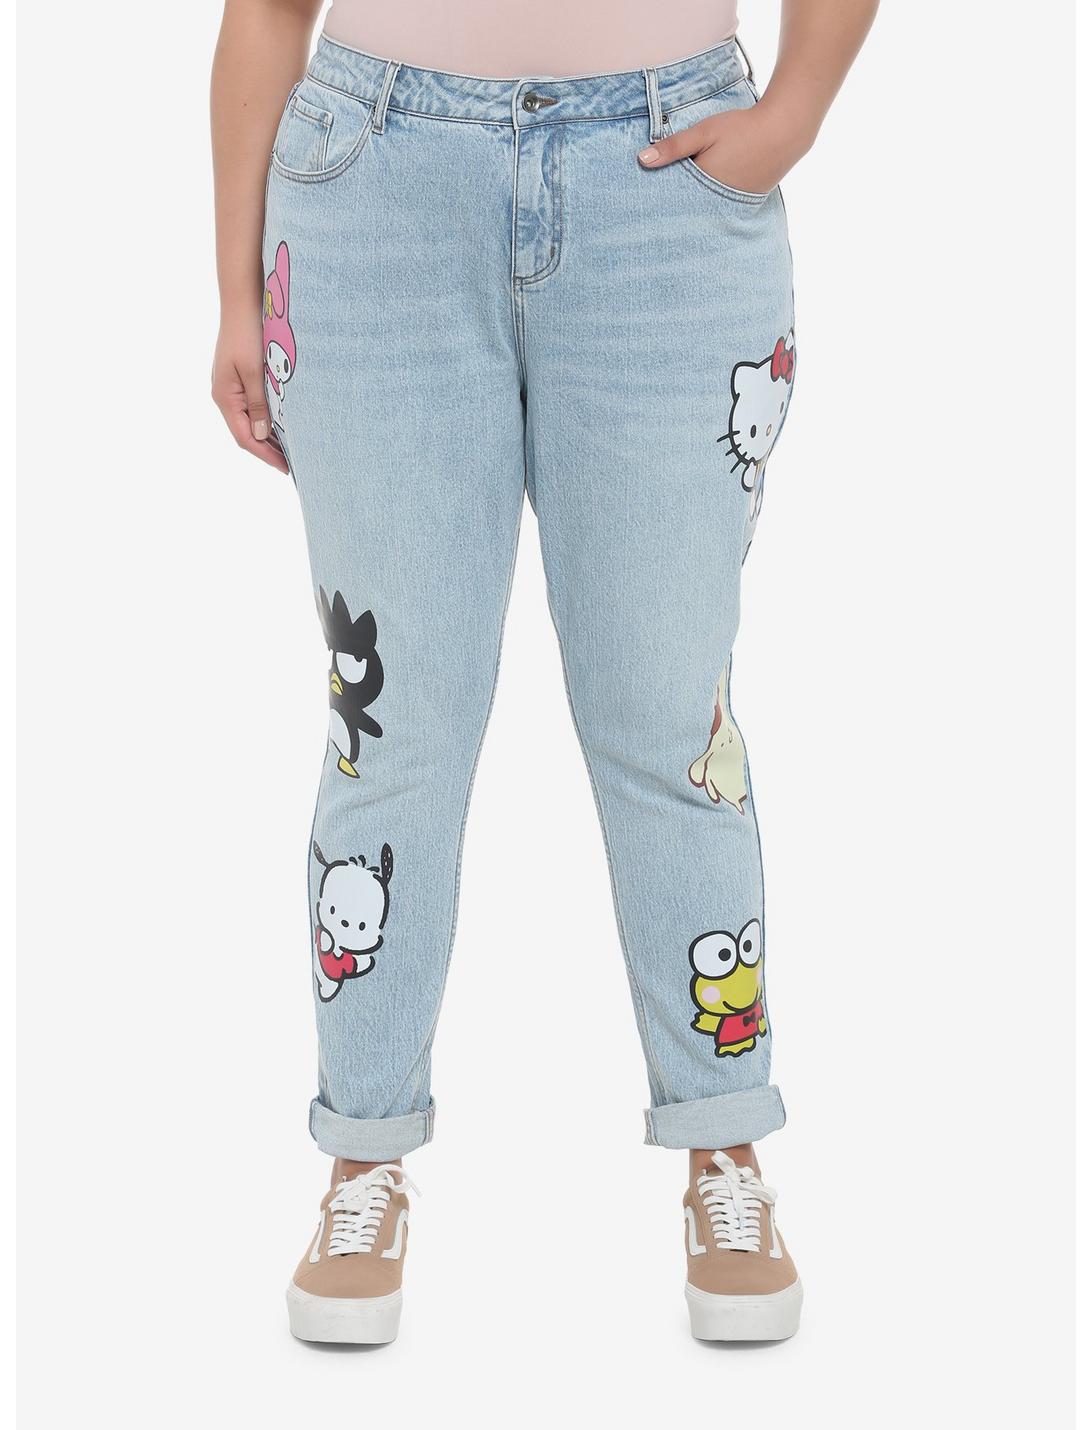 Hello Kitty And Friends Mom Jeans Plus Size, LIGHT WASH, hi-res